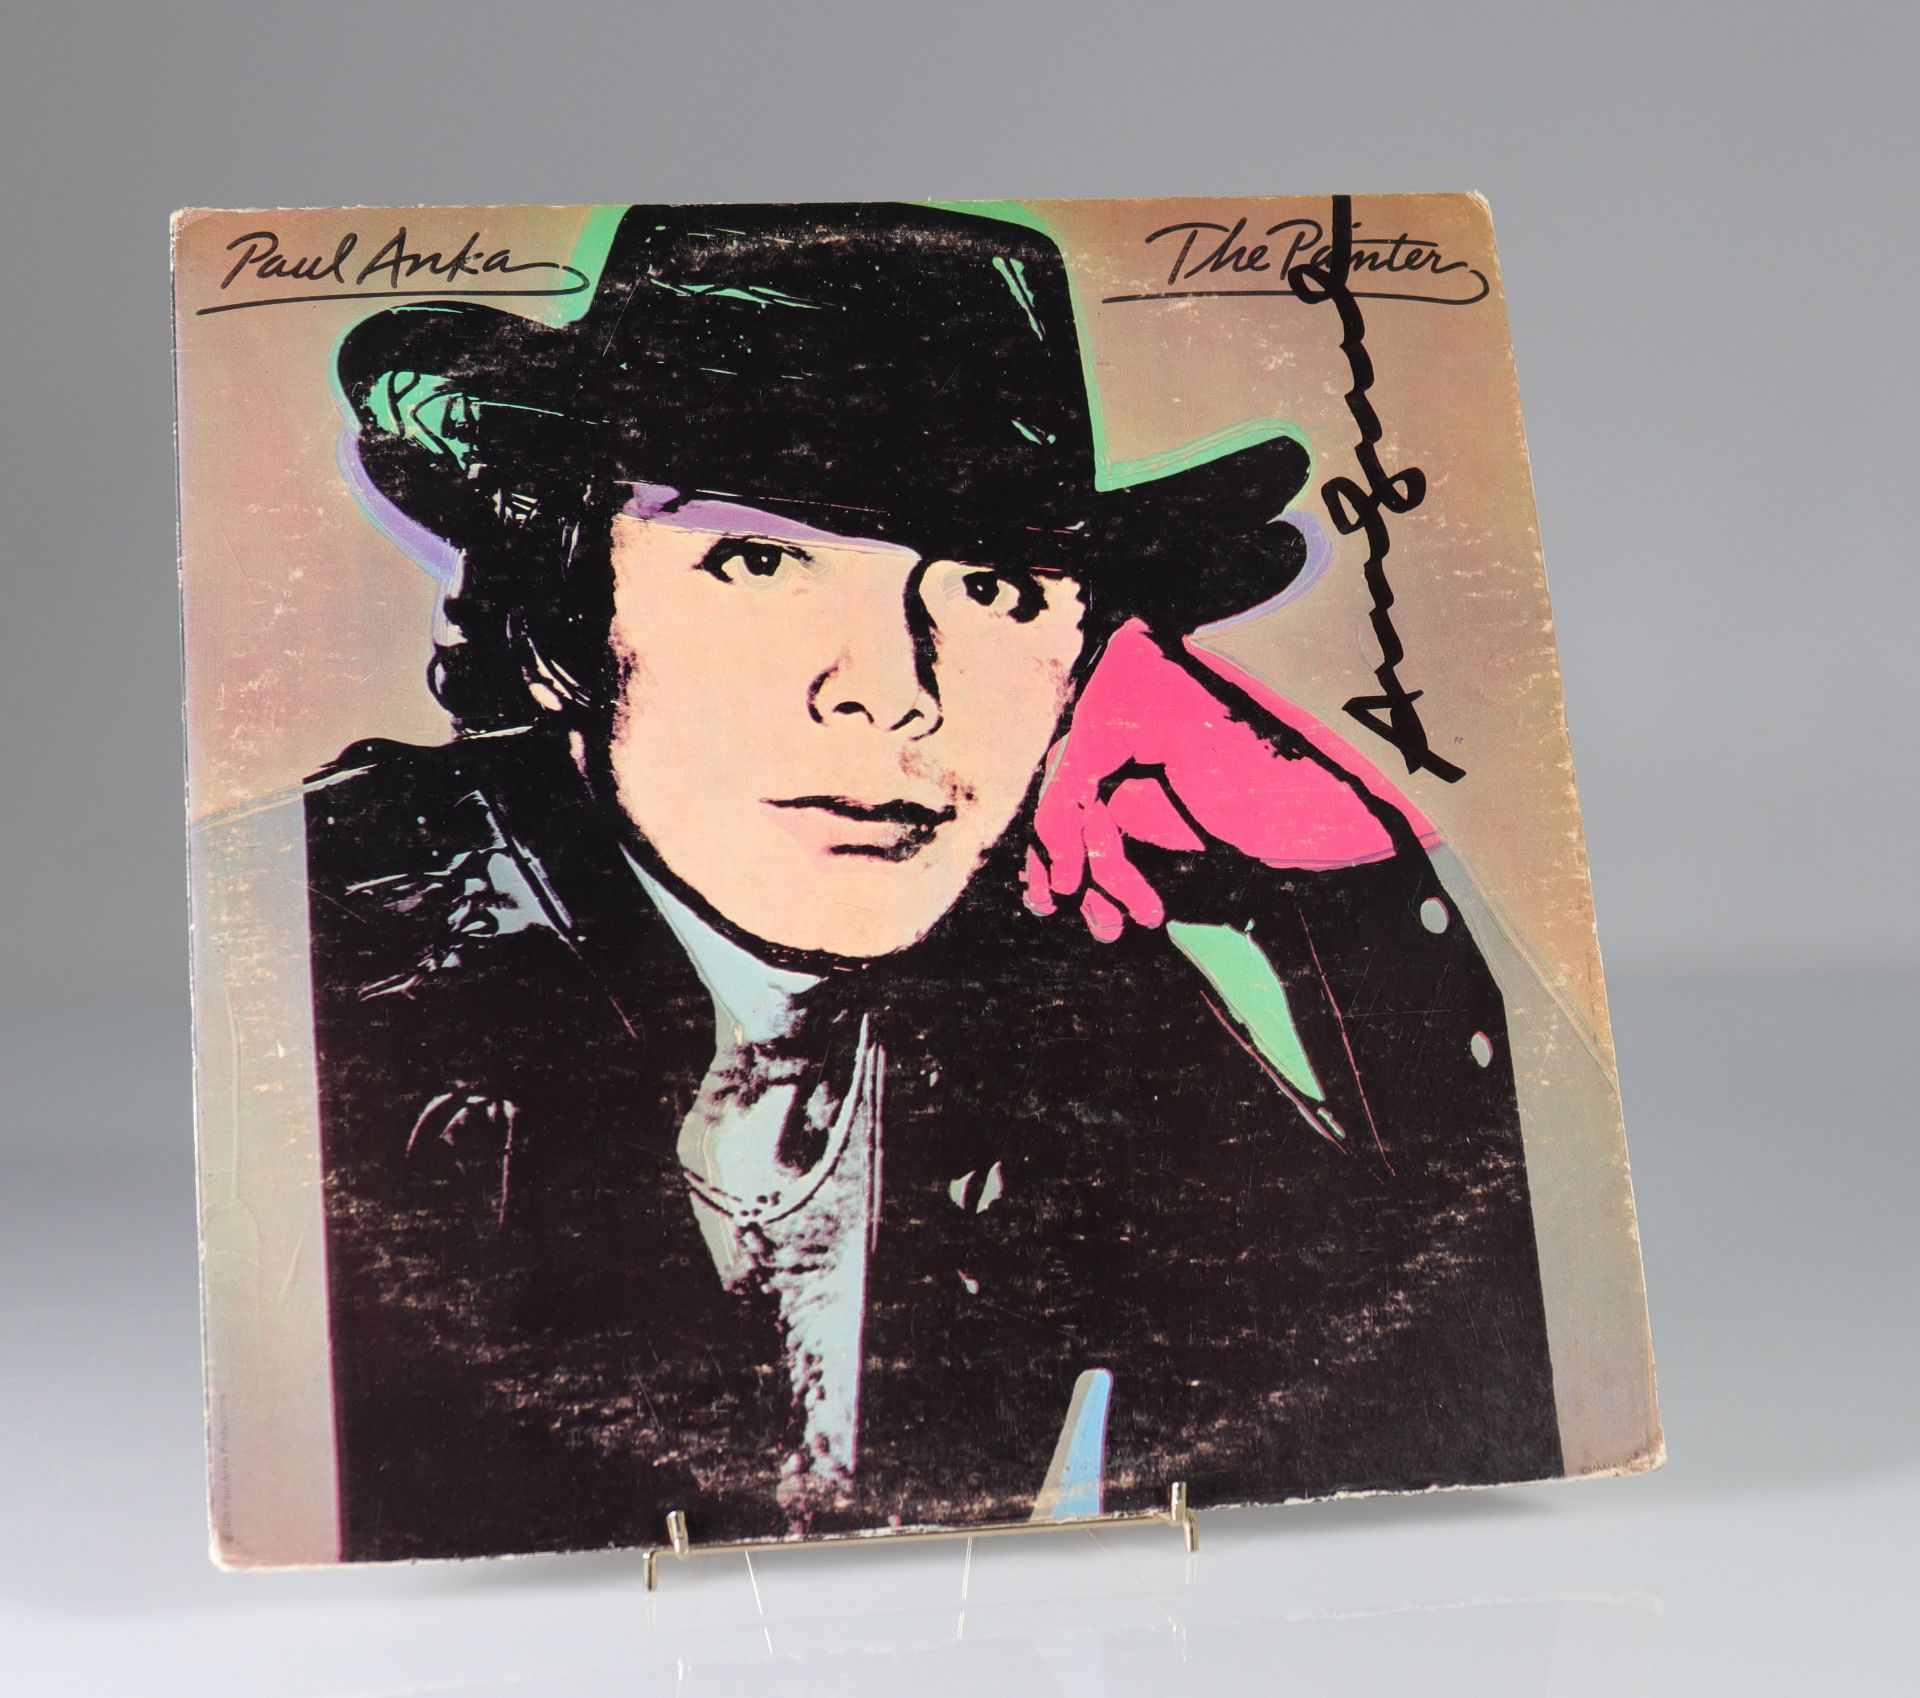 ANDY WARHOL - PAUL ANKA - THE PAINTER, 1976 Hand signed by Andy Warhol in black marker on the front